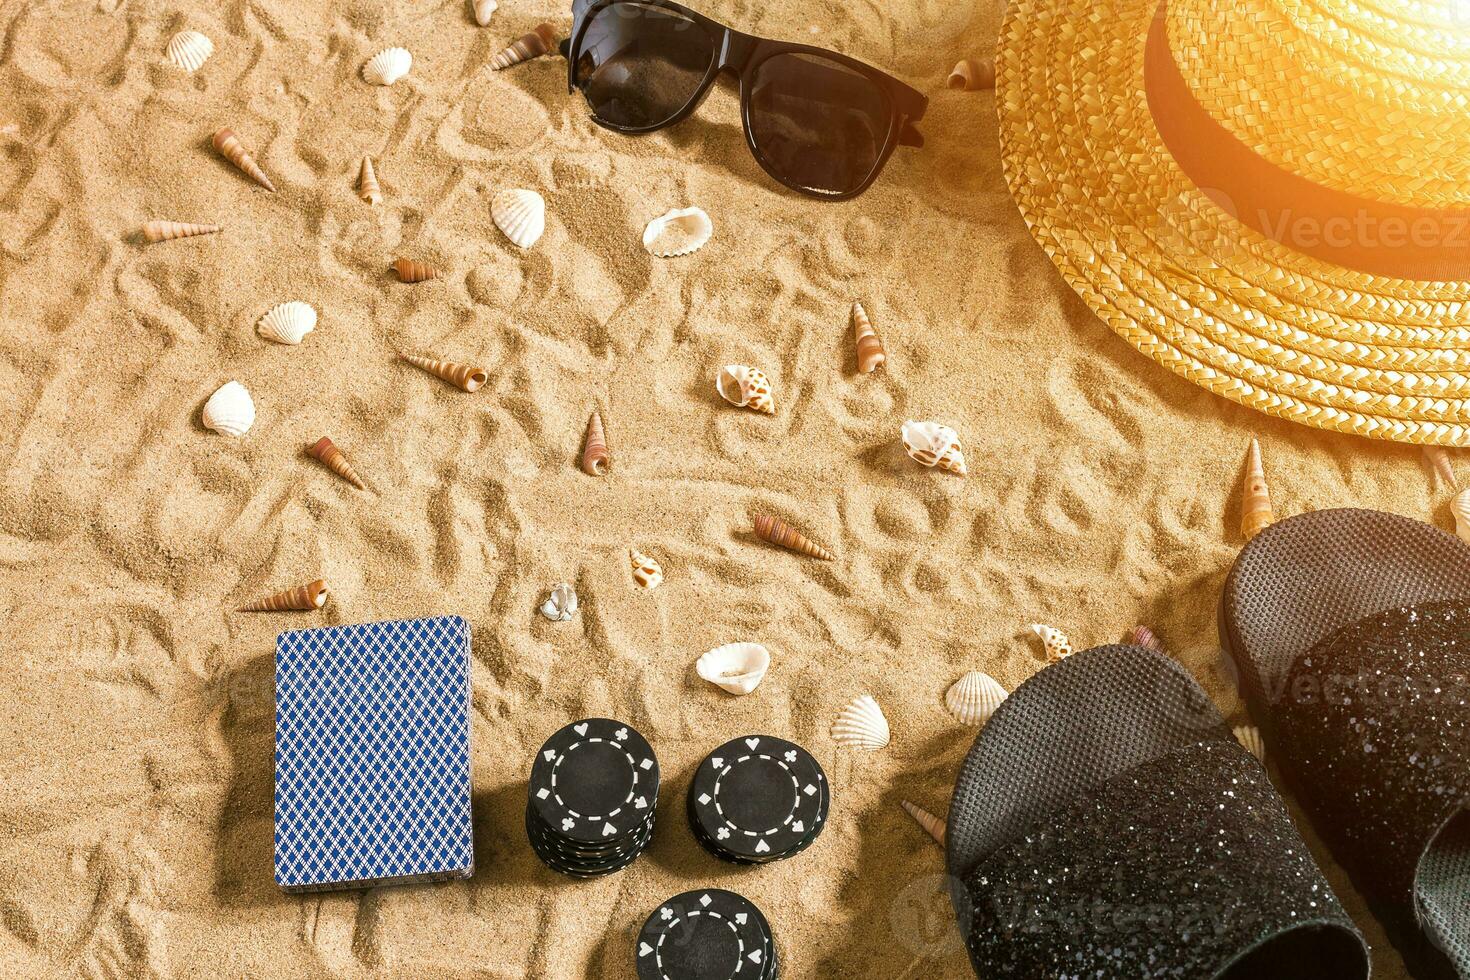 Beachpoker. Chips and cards on the sand. Around the seashells, sunglasses and flip flops. Top view photo